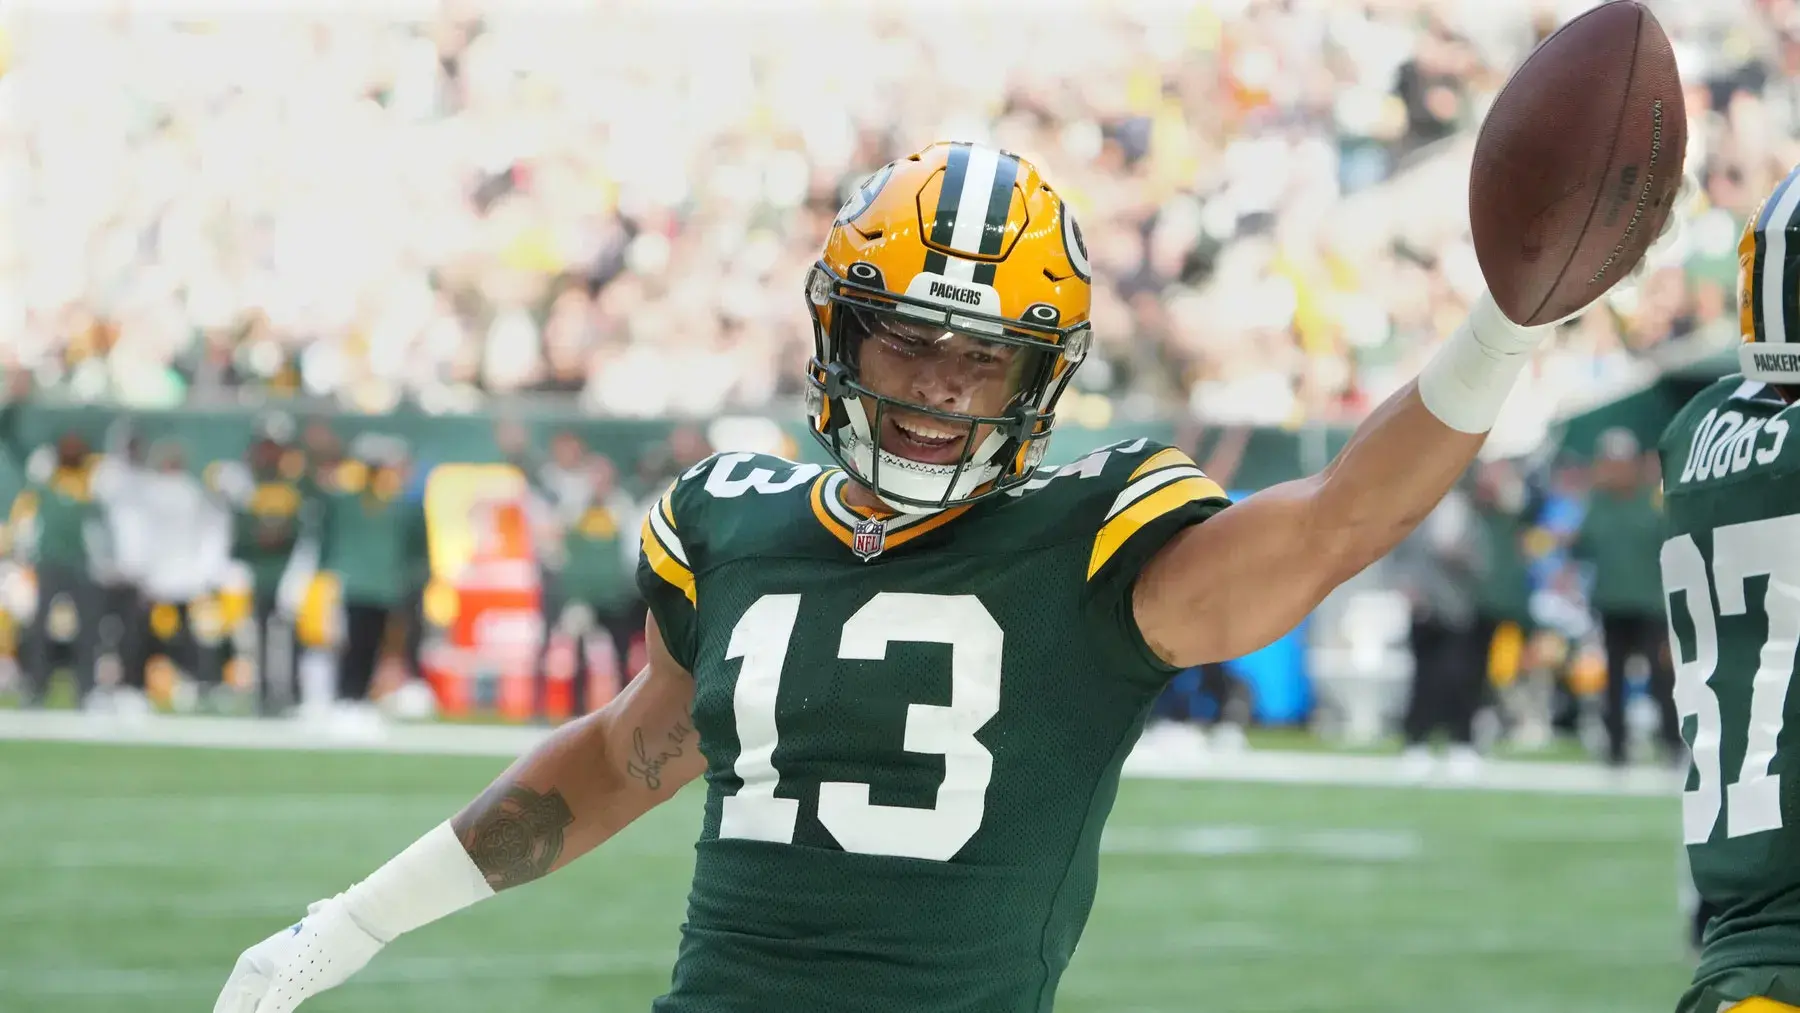 Oct 9, 2022; London, United Kingdom; Green Bay Packers wide receiver Allen Lazard (13) celebrates after scoring a touchdown in the first quarter against the New York Giants during an NFL International Series game at Tottenham Hotspur Stadium. / Kirby Lee-USA TODAY Sports